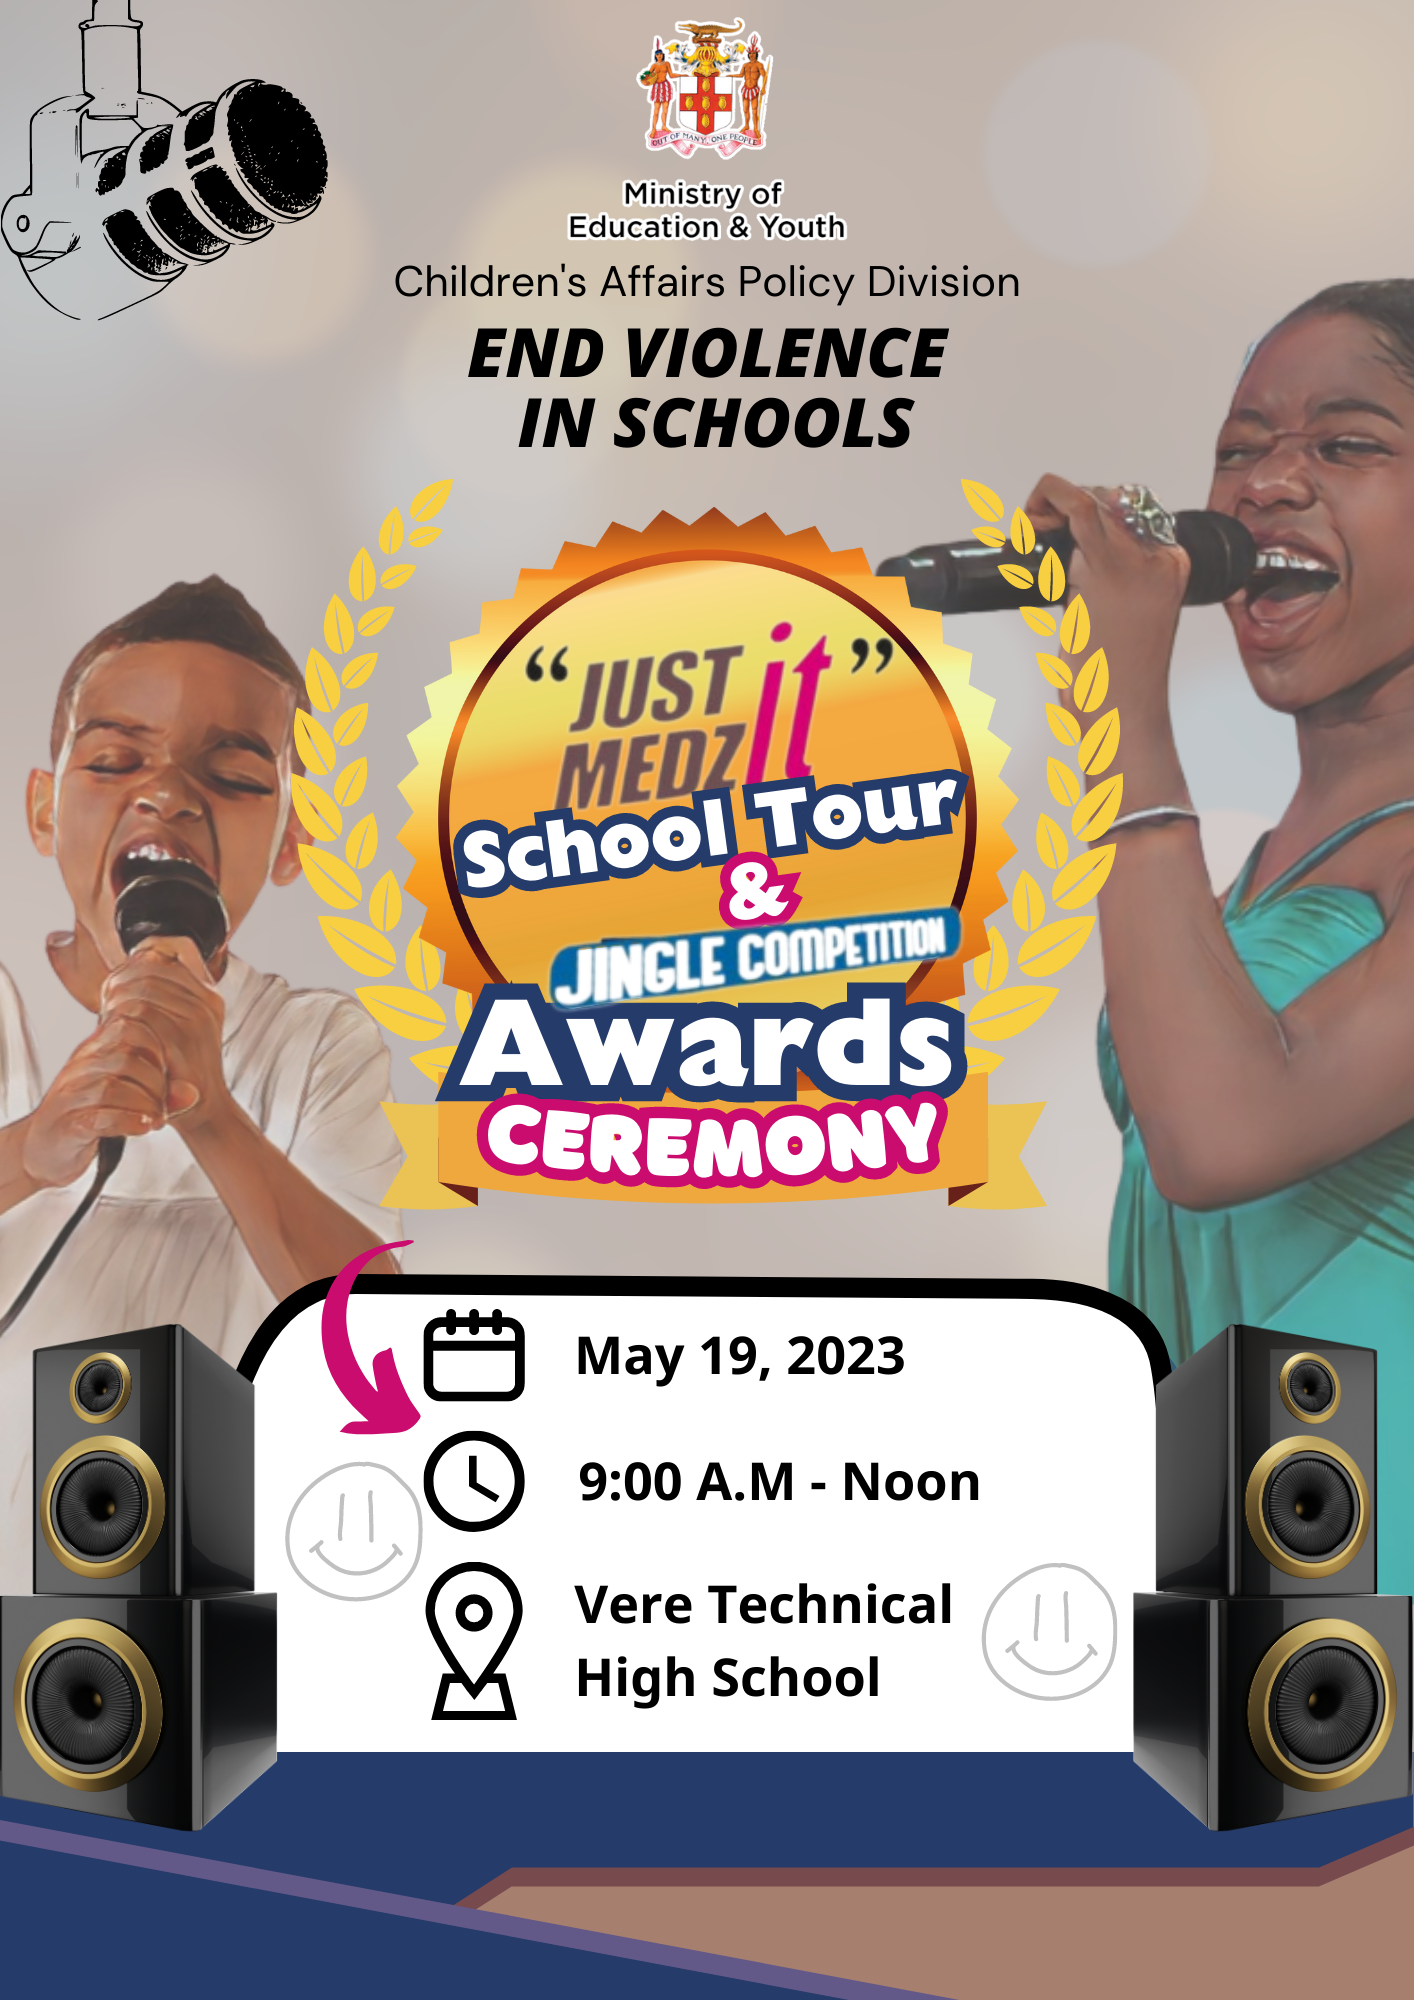 Just Medz It School Tour and Jingle Competition Awards Ceremony